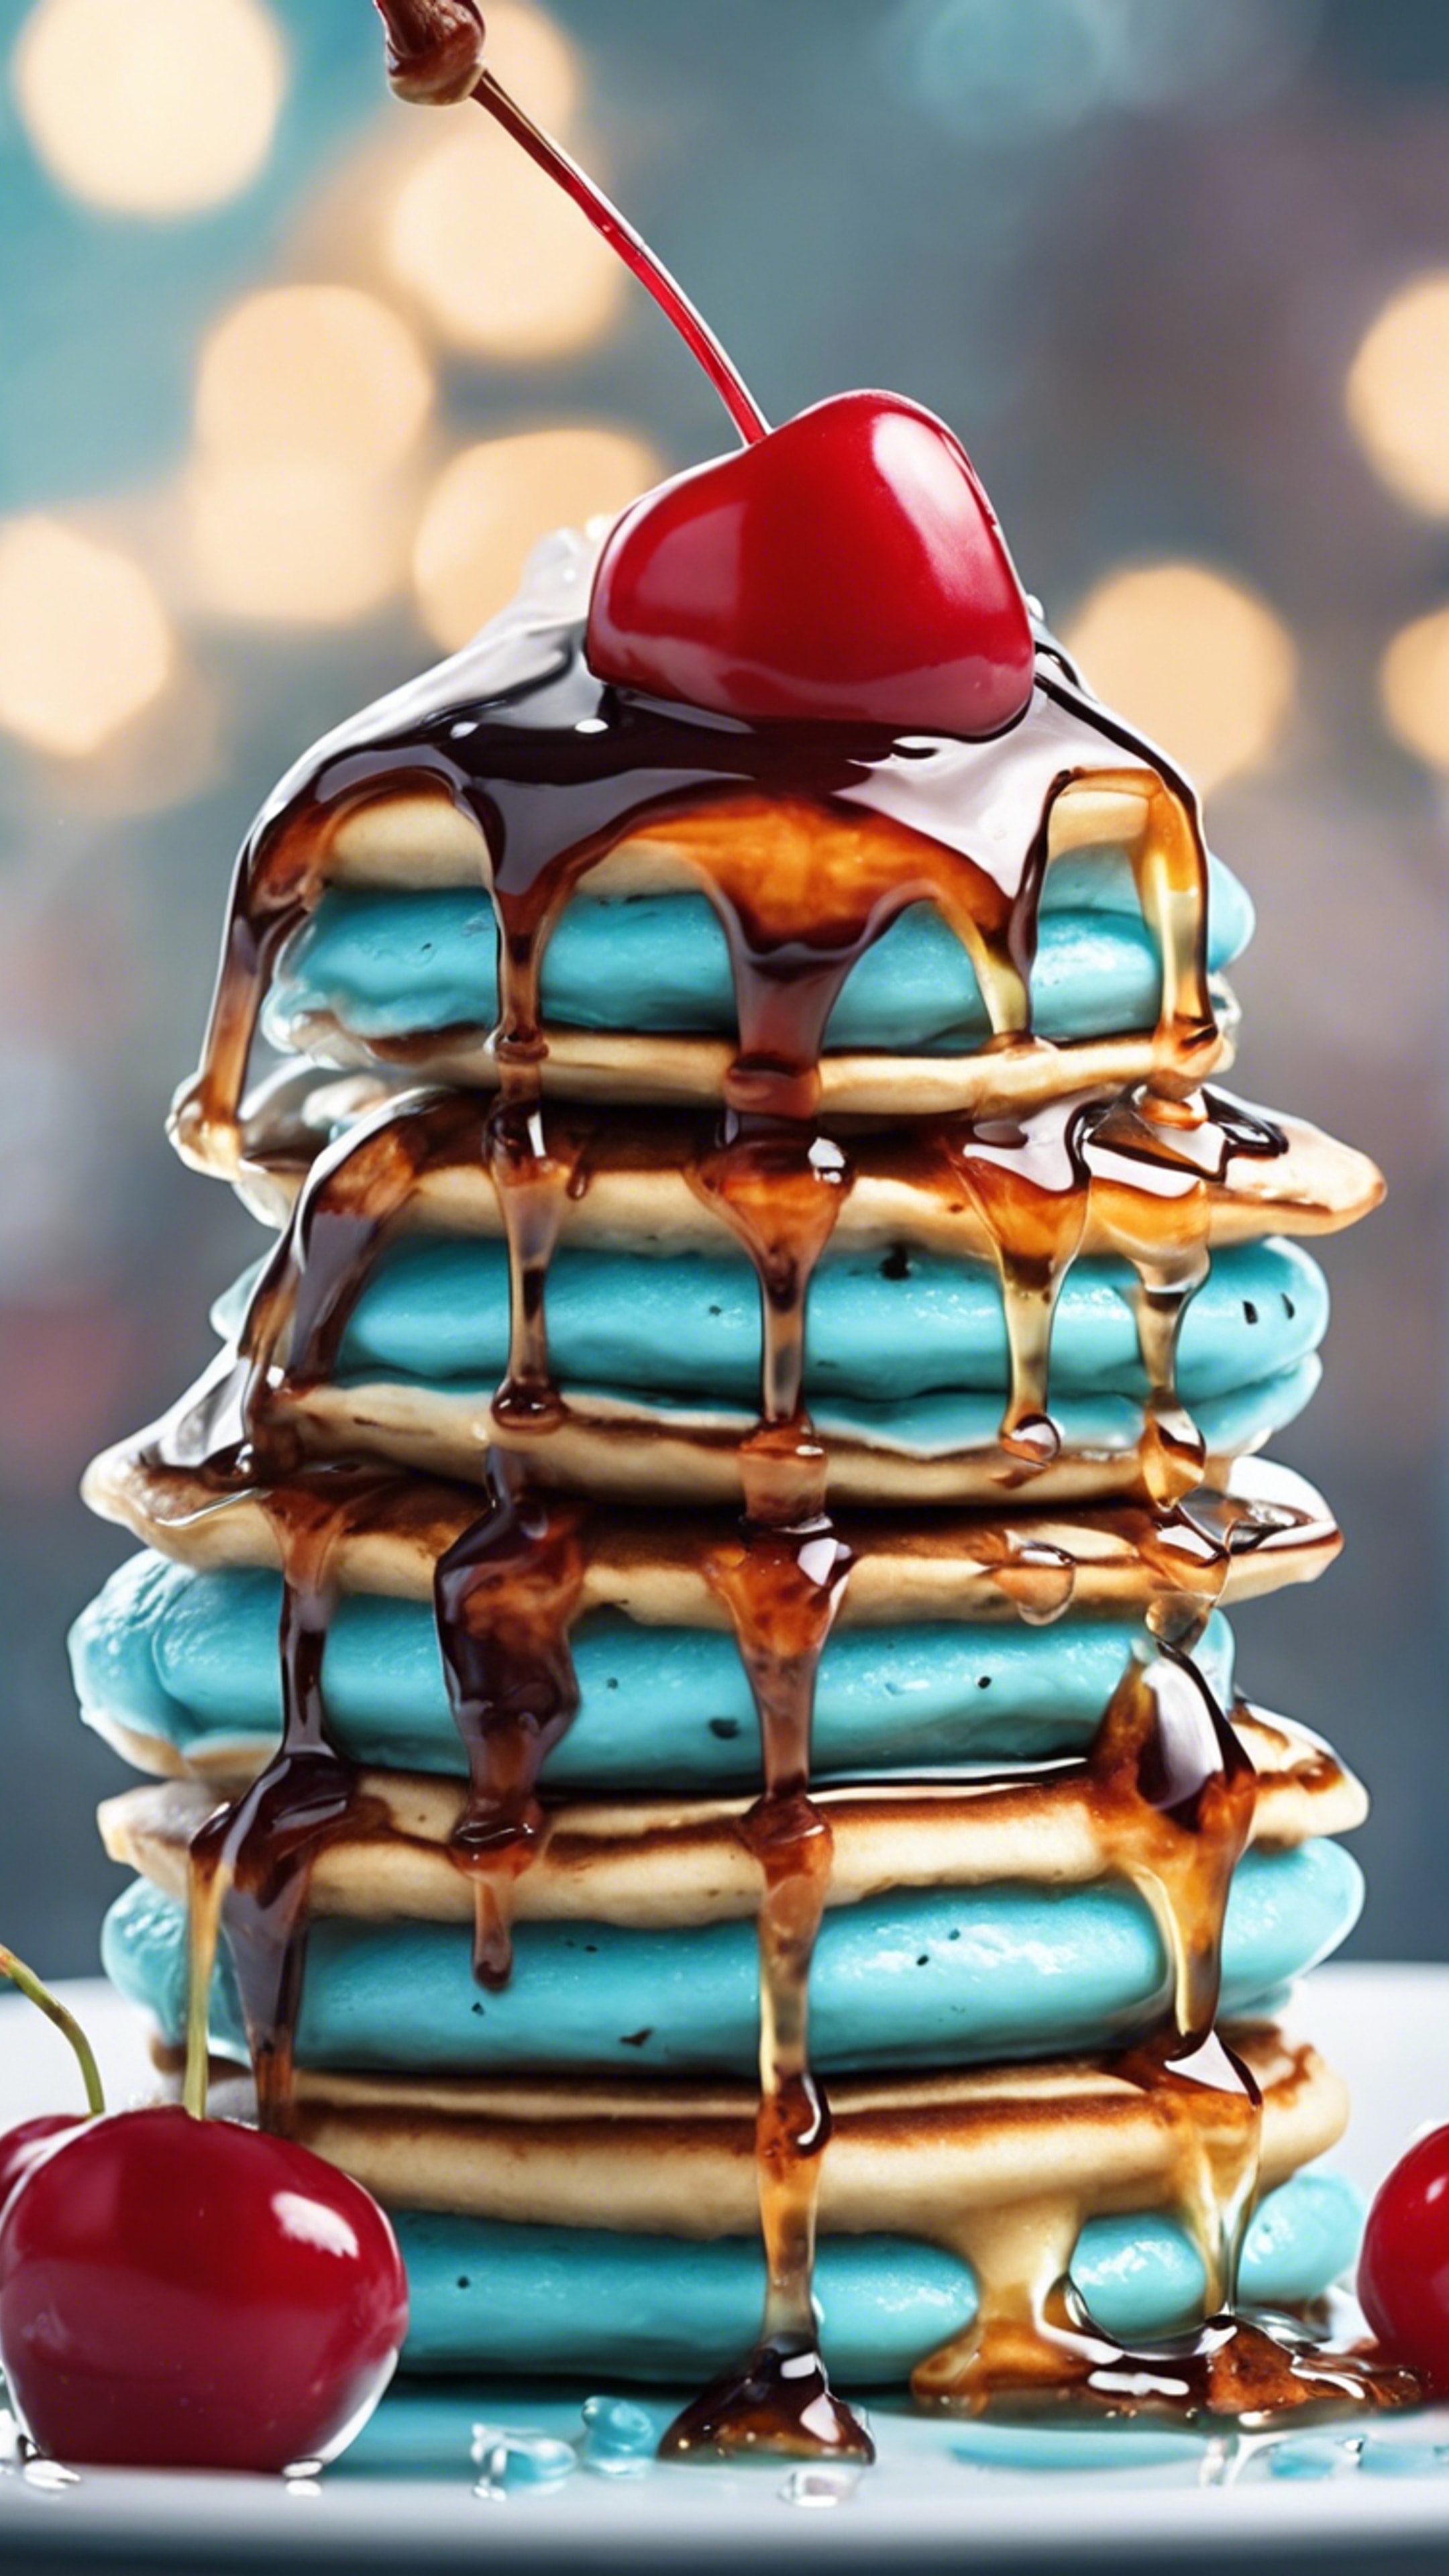 A stack of kawaii light blue pancakes dripping with syrup and a cherry on top. Wallpaper[05c3a9af3a95463c8379]